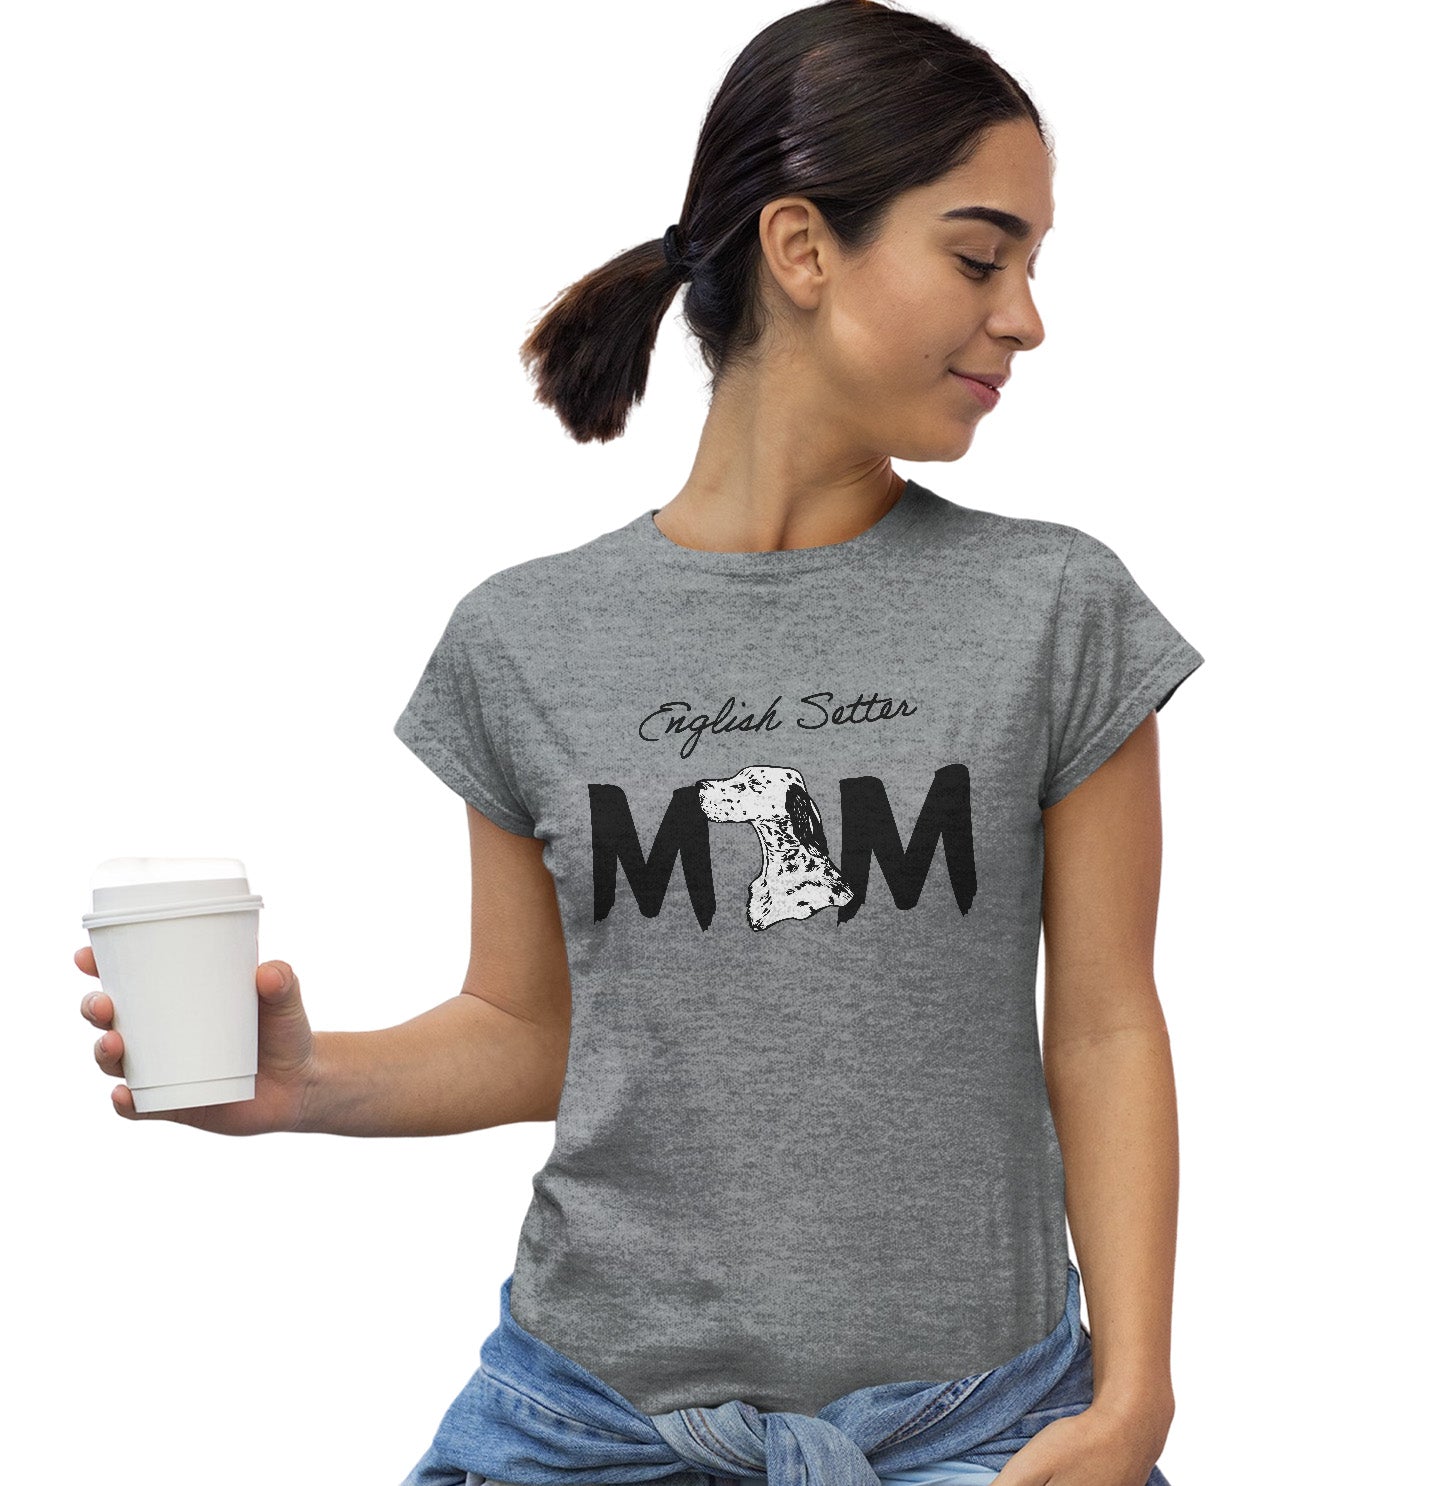 English Setter Breed Mom - Women's Fitted T-Shirt